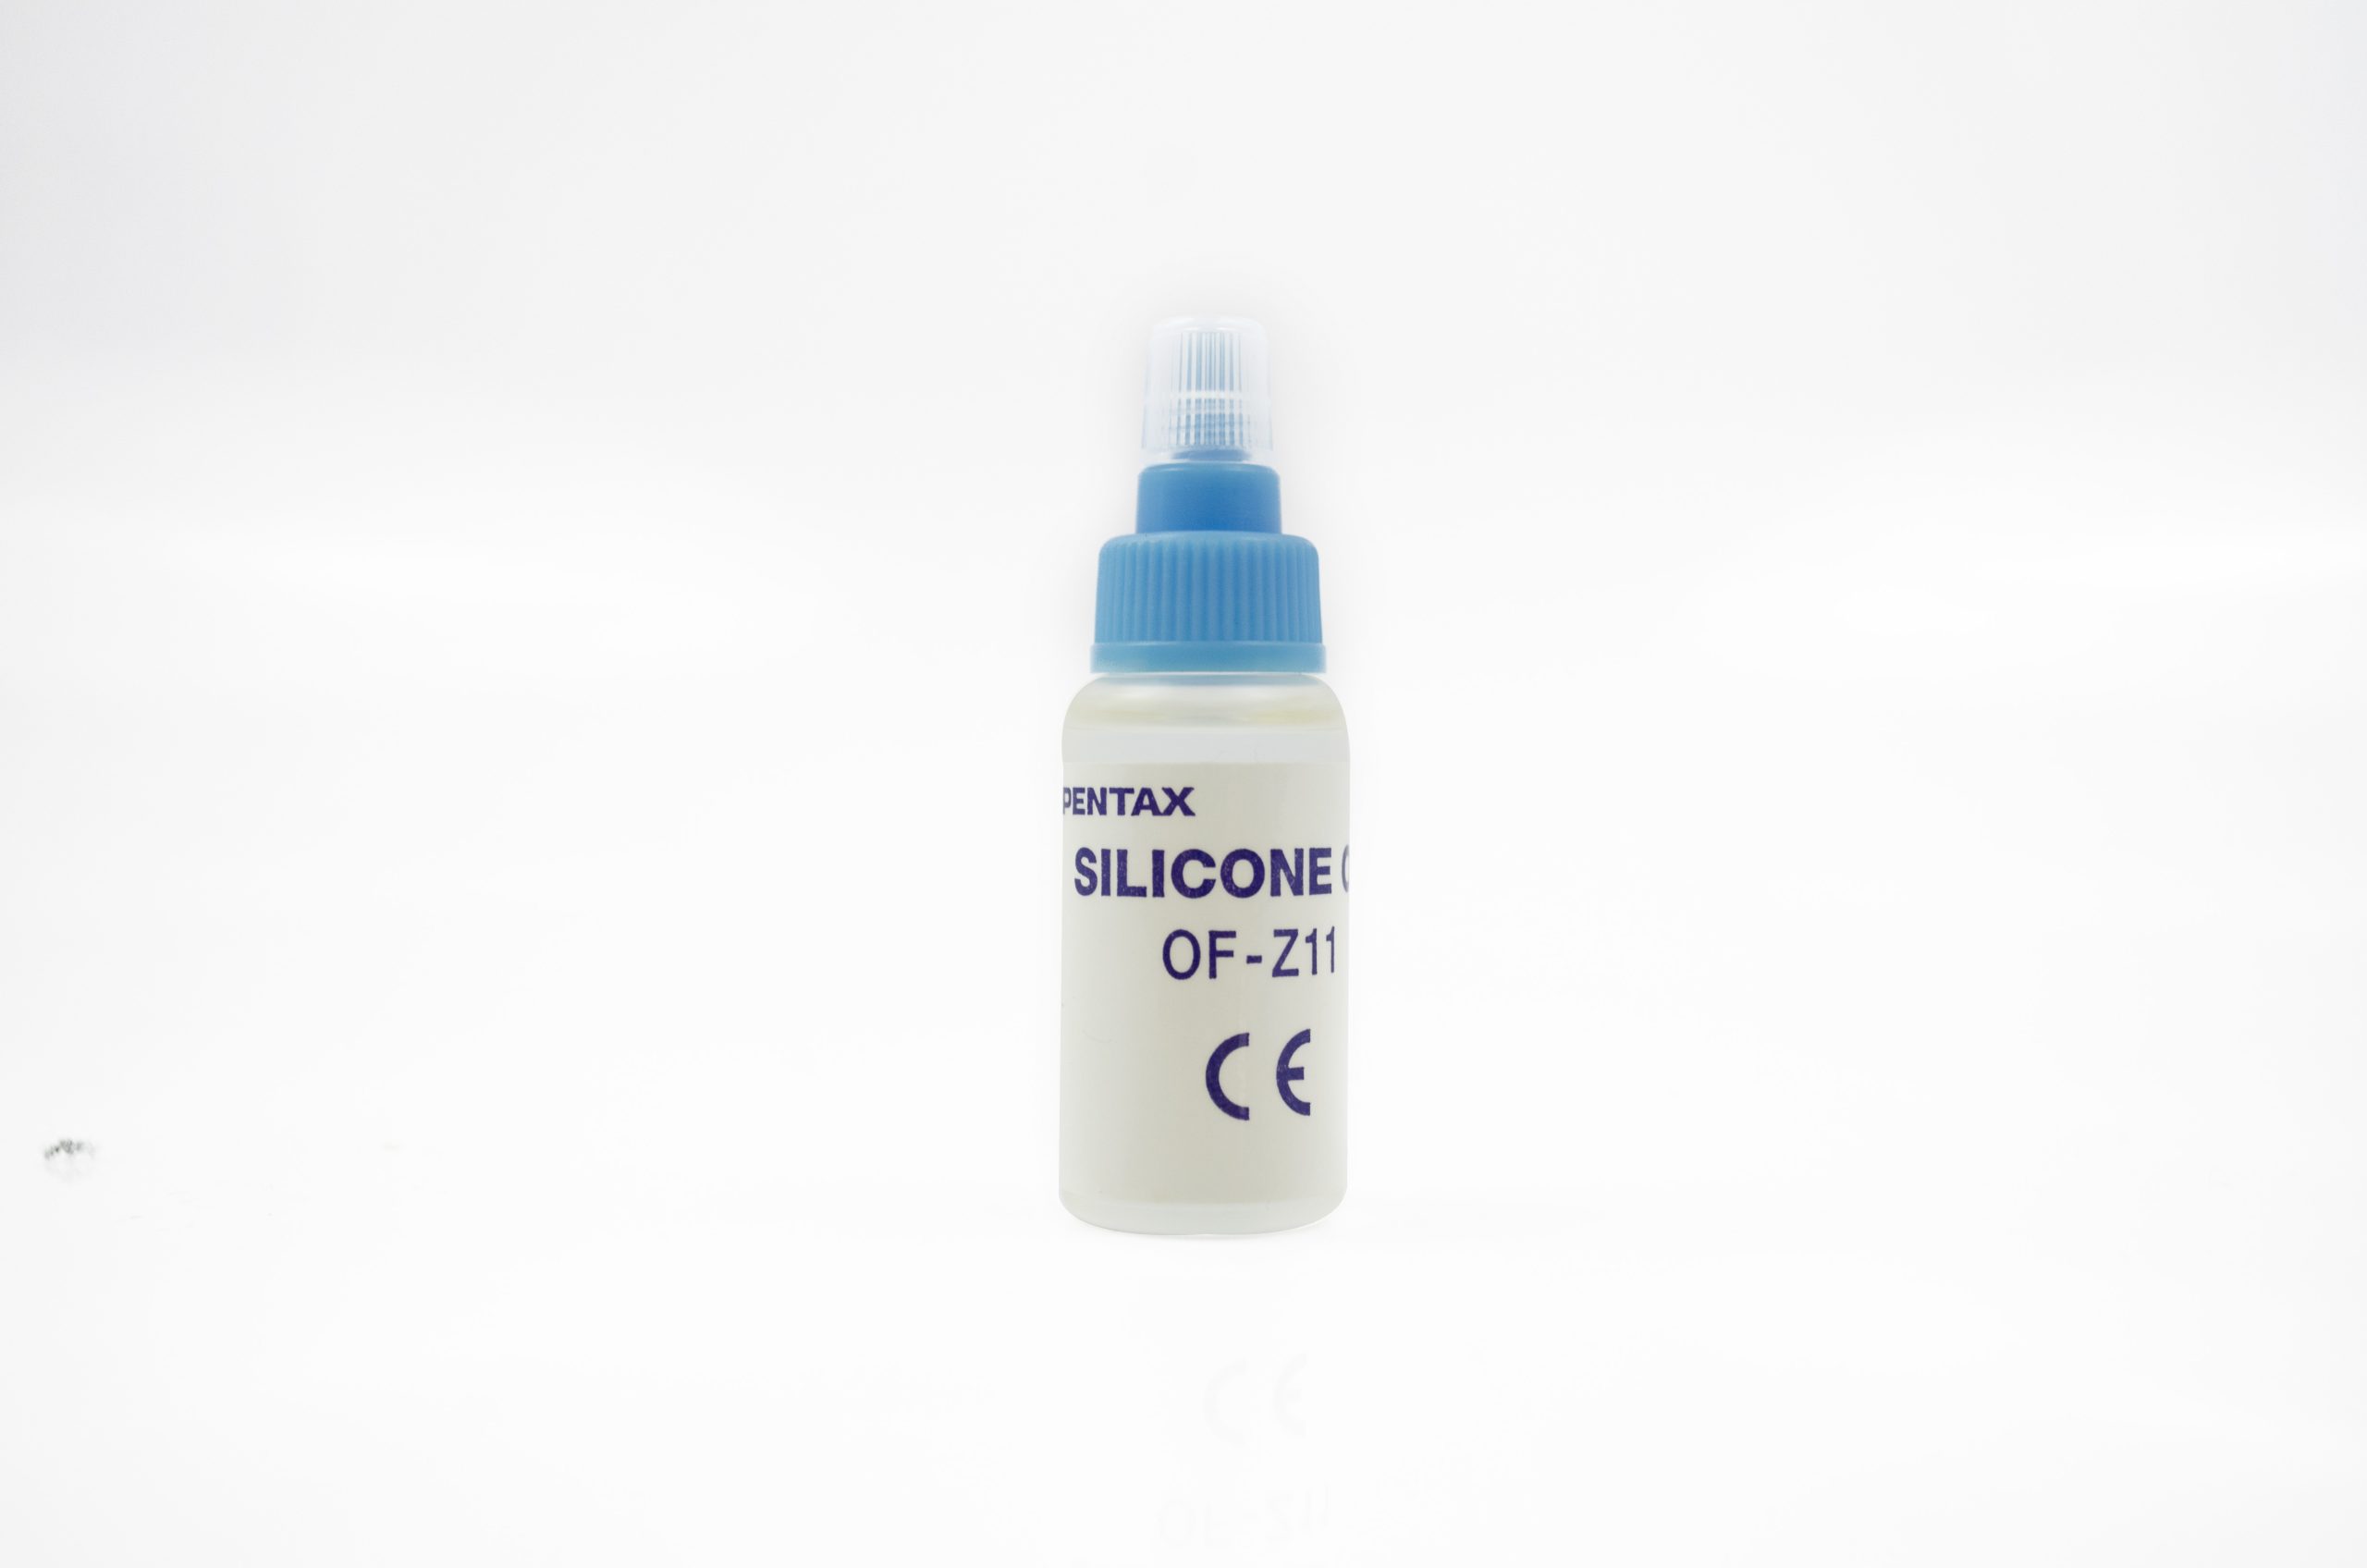 Reusable Silicone Oil for O-Rings and Valves - OF-Z11 [1/Bag]